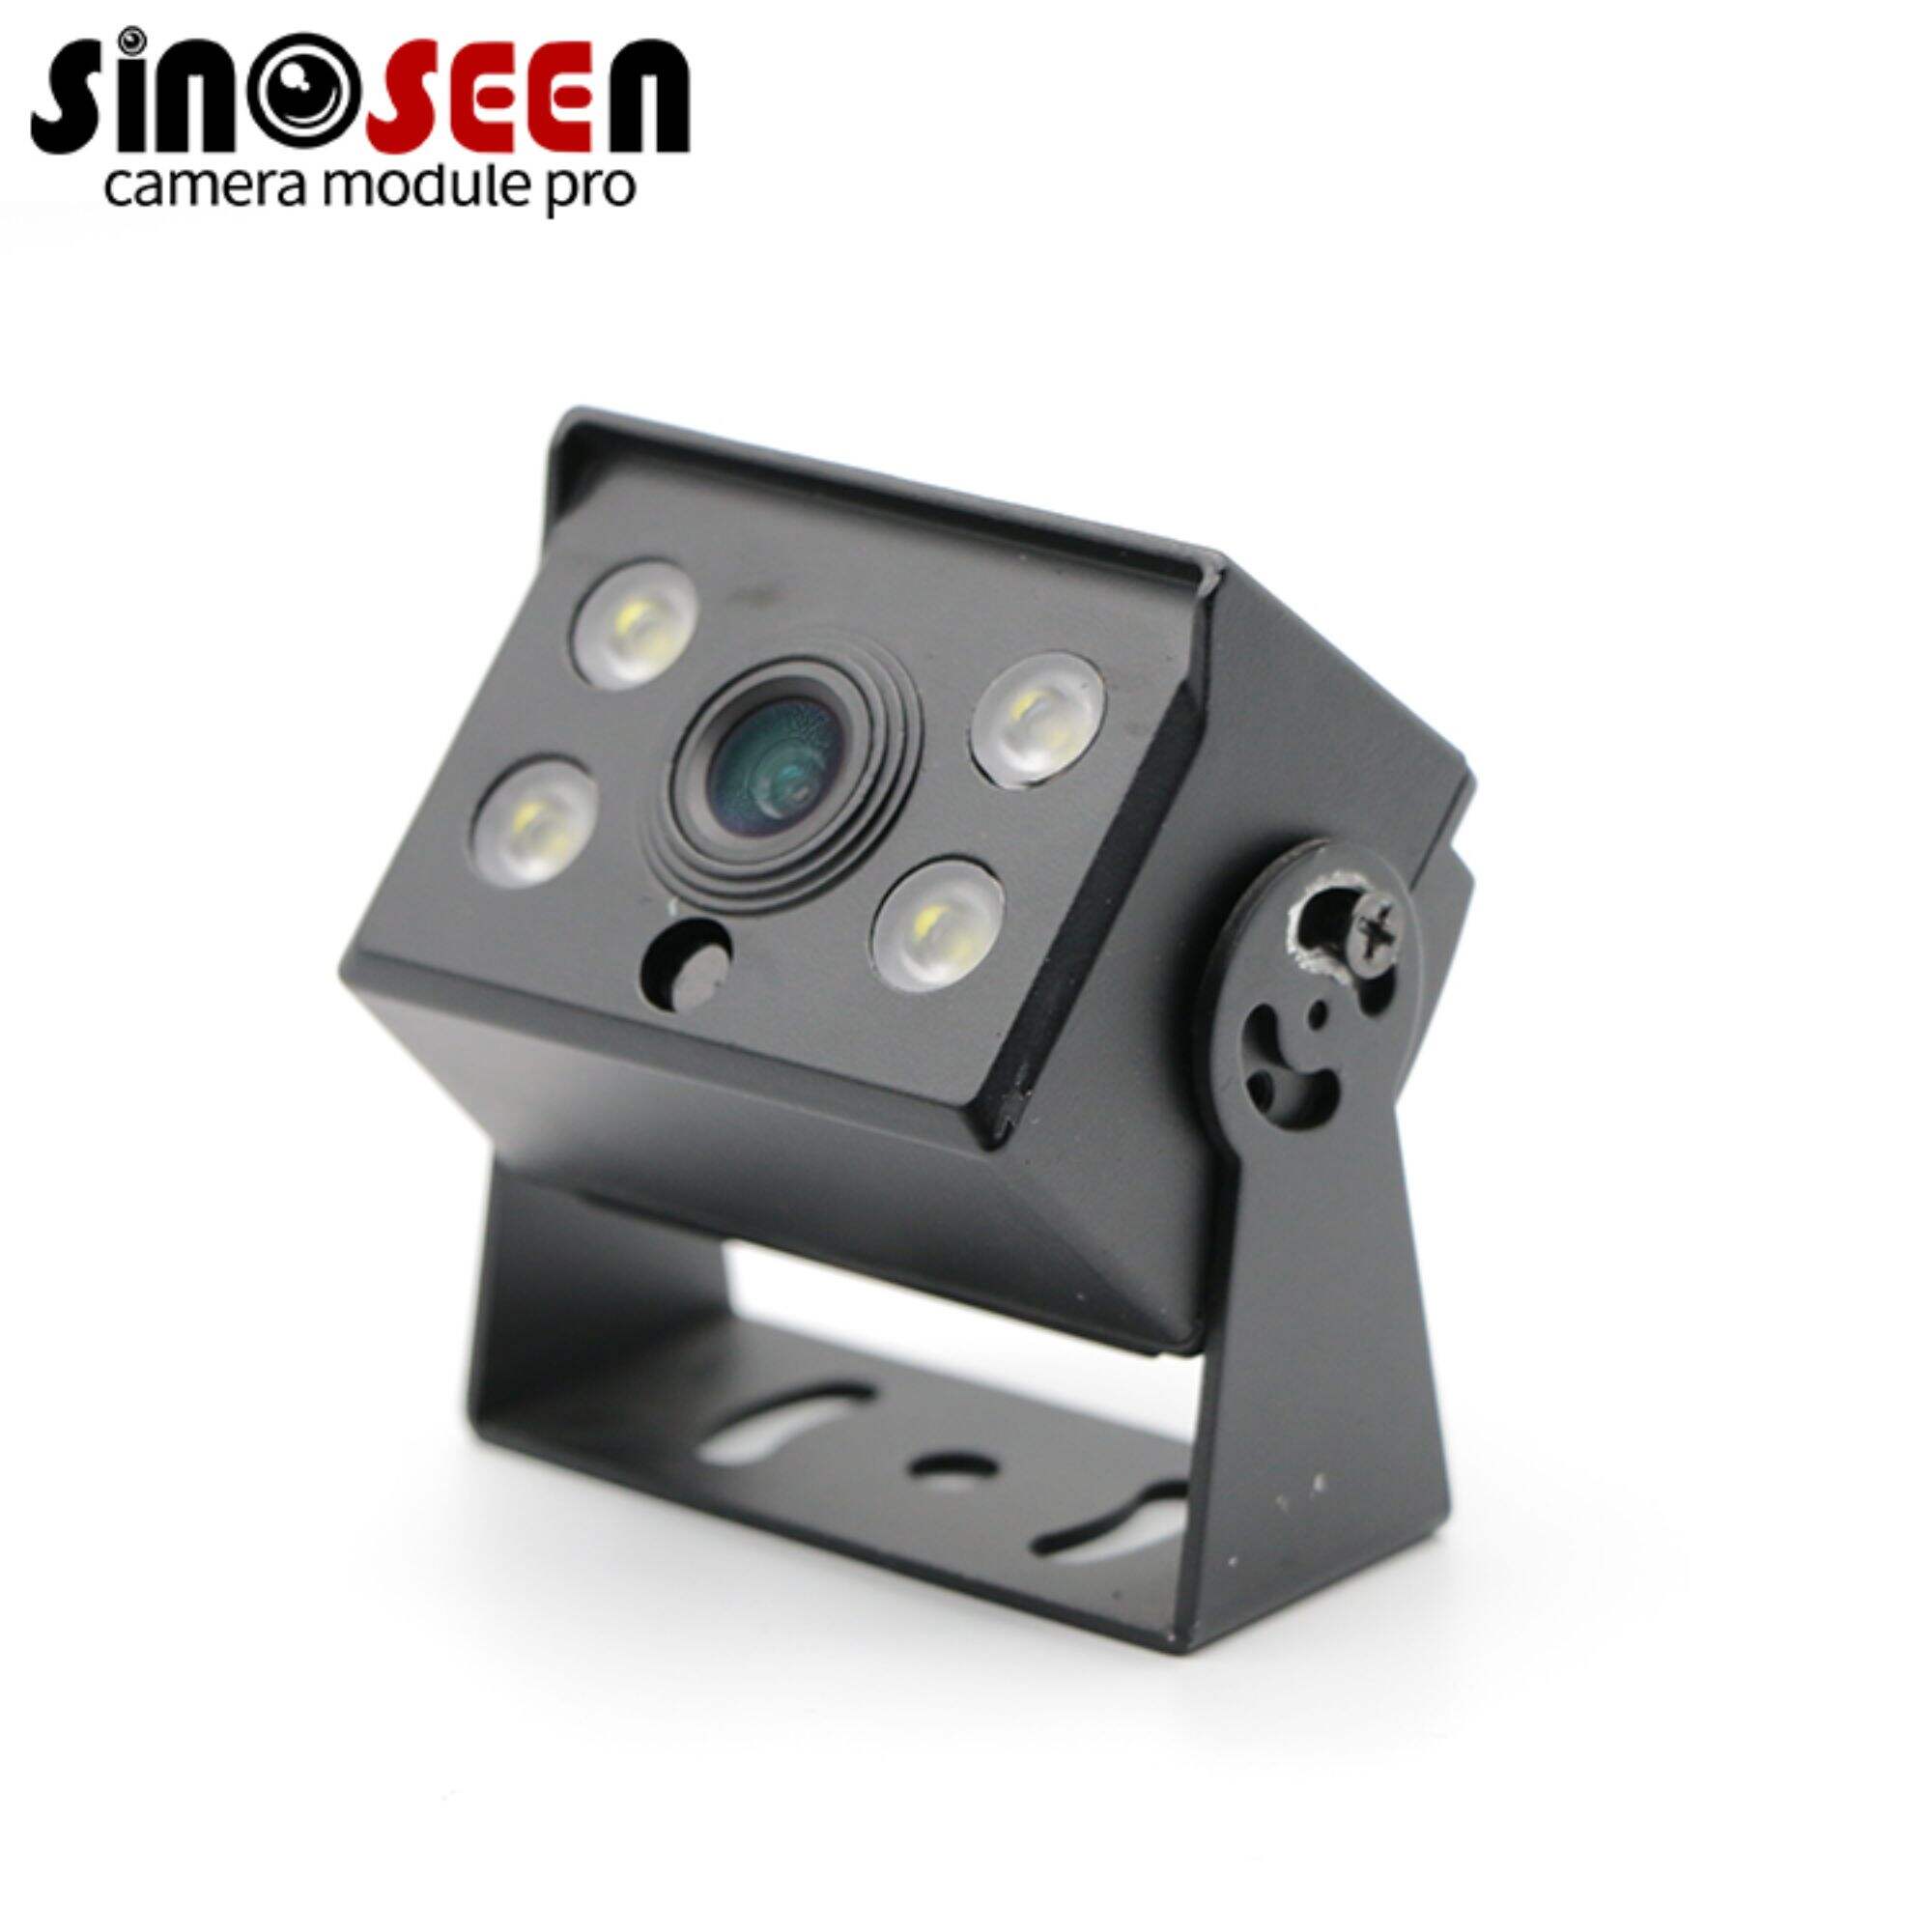 Aluminum Alloy Housing 4 LEDs Night Vision SONY IMX335 CMOS Camera for Agricultural Monitoring  